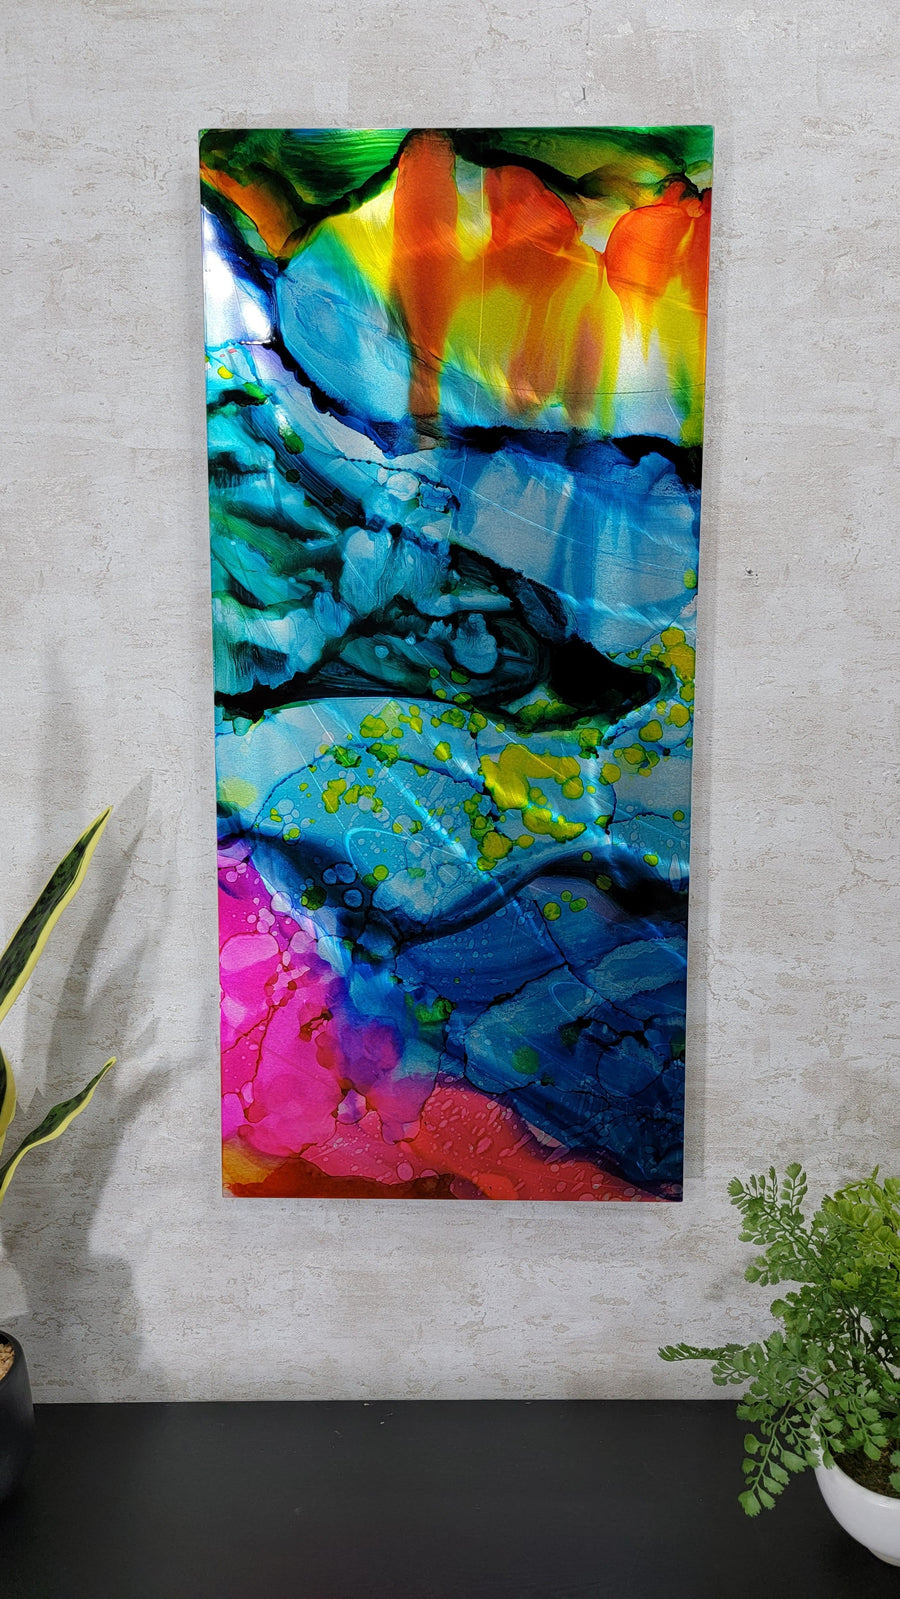 Only One !  Multicolor Abstract Painting  36" x 16" x 2"  Metal Art by Jon Allen - GEM W41